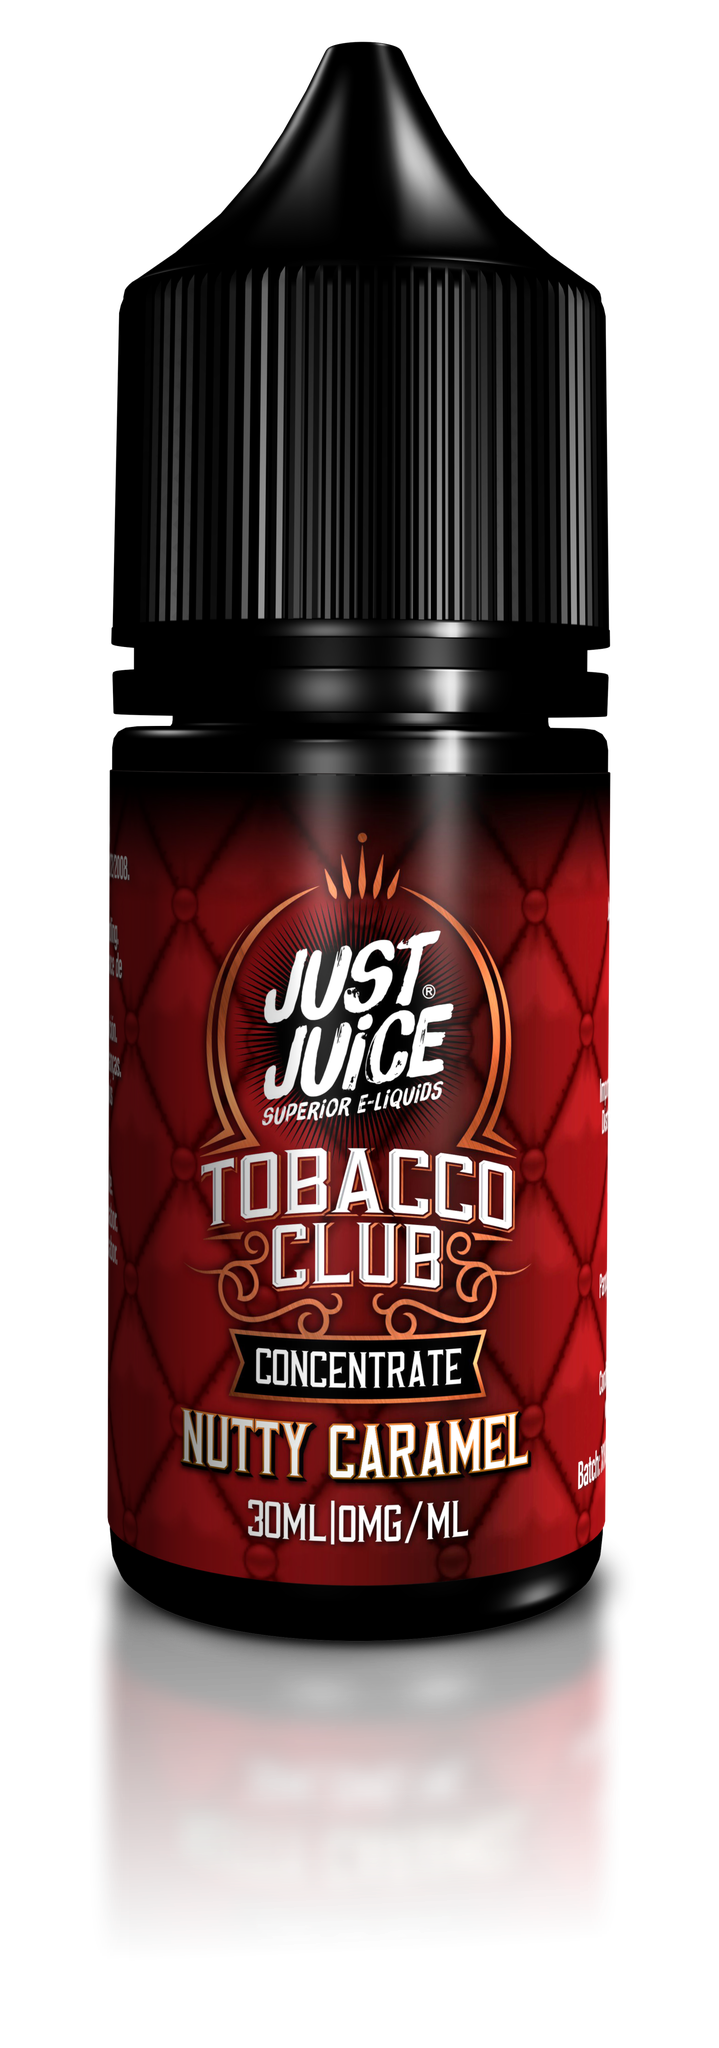 Nutty Caramel Tobacco Flavour Concentrate by Just Juice